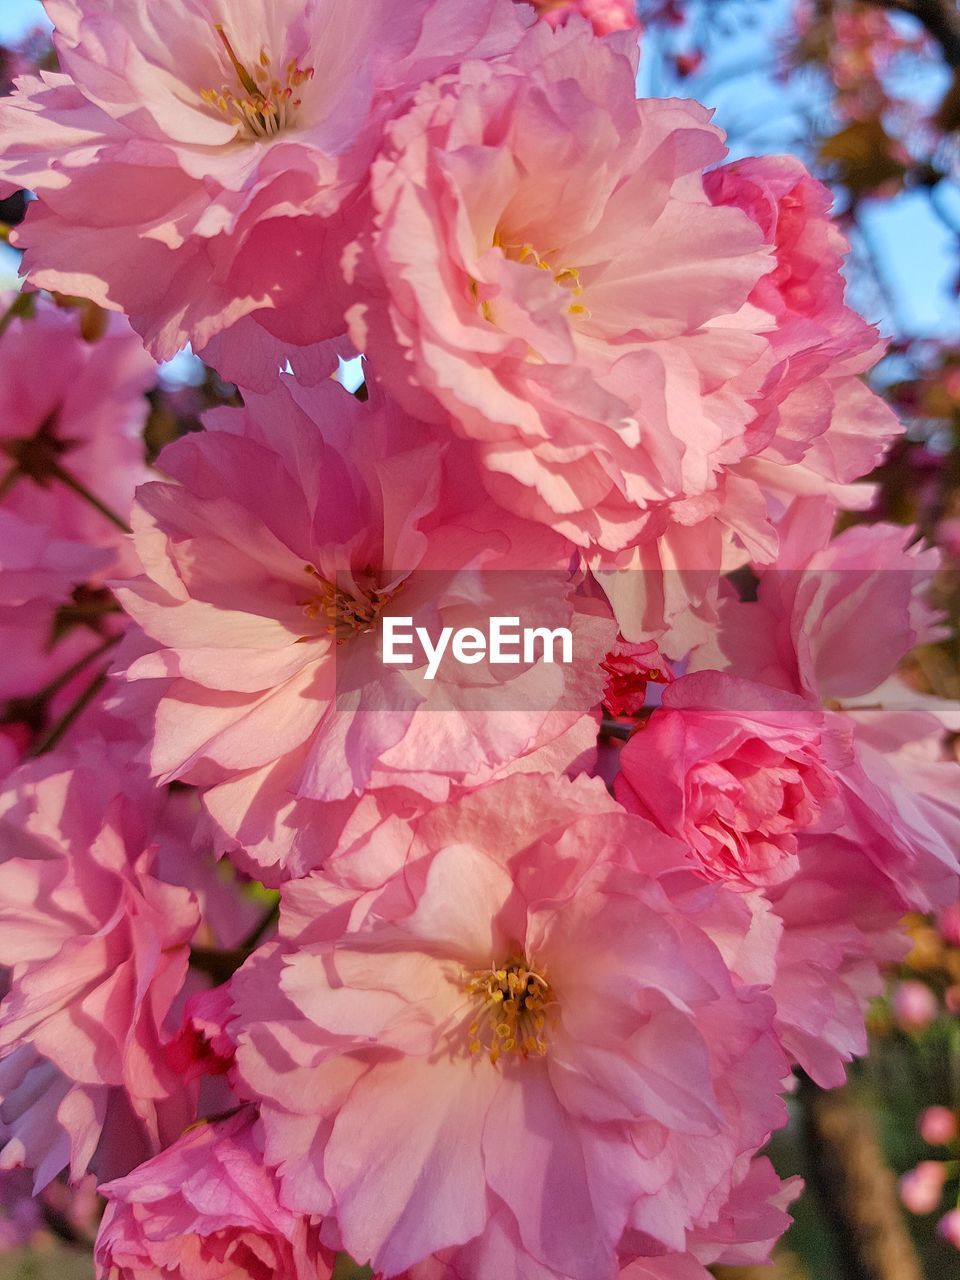 CLOSE-UP OF PINK CHERRY BLOSSOMS IN SPRING